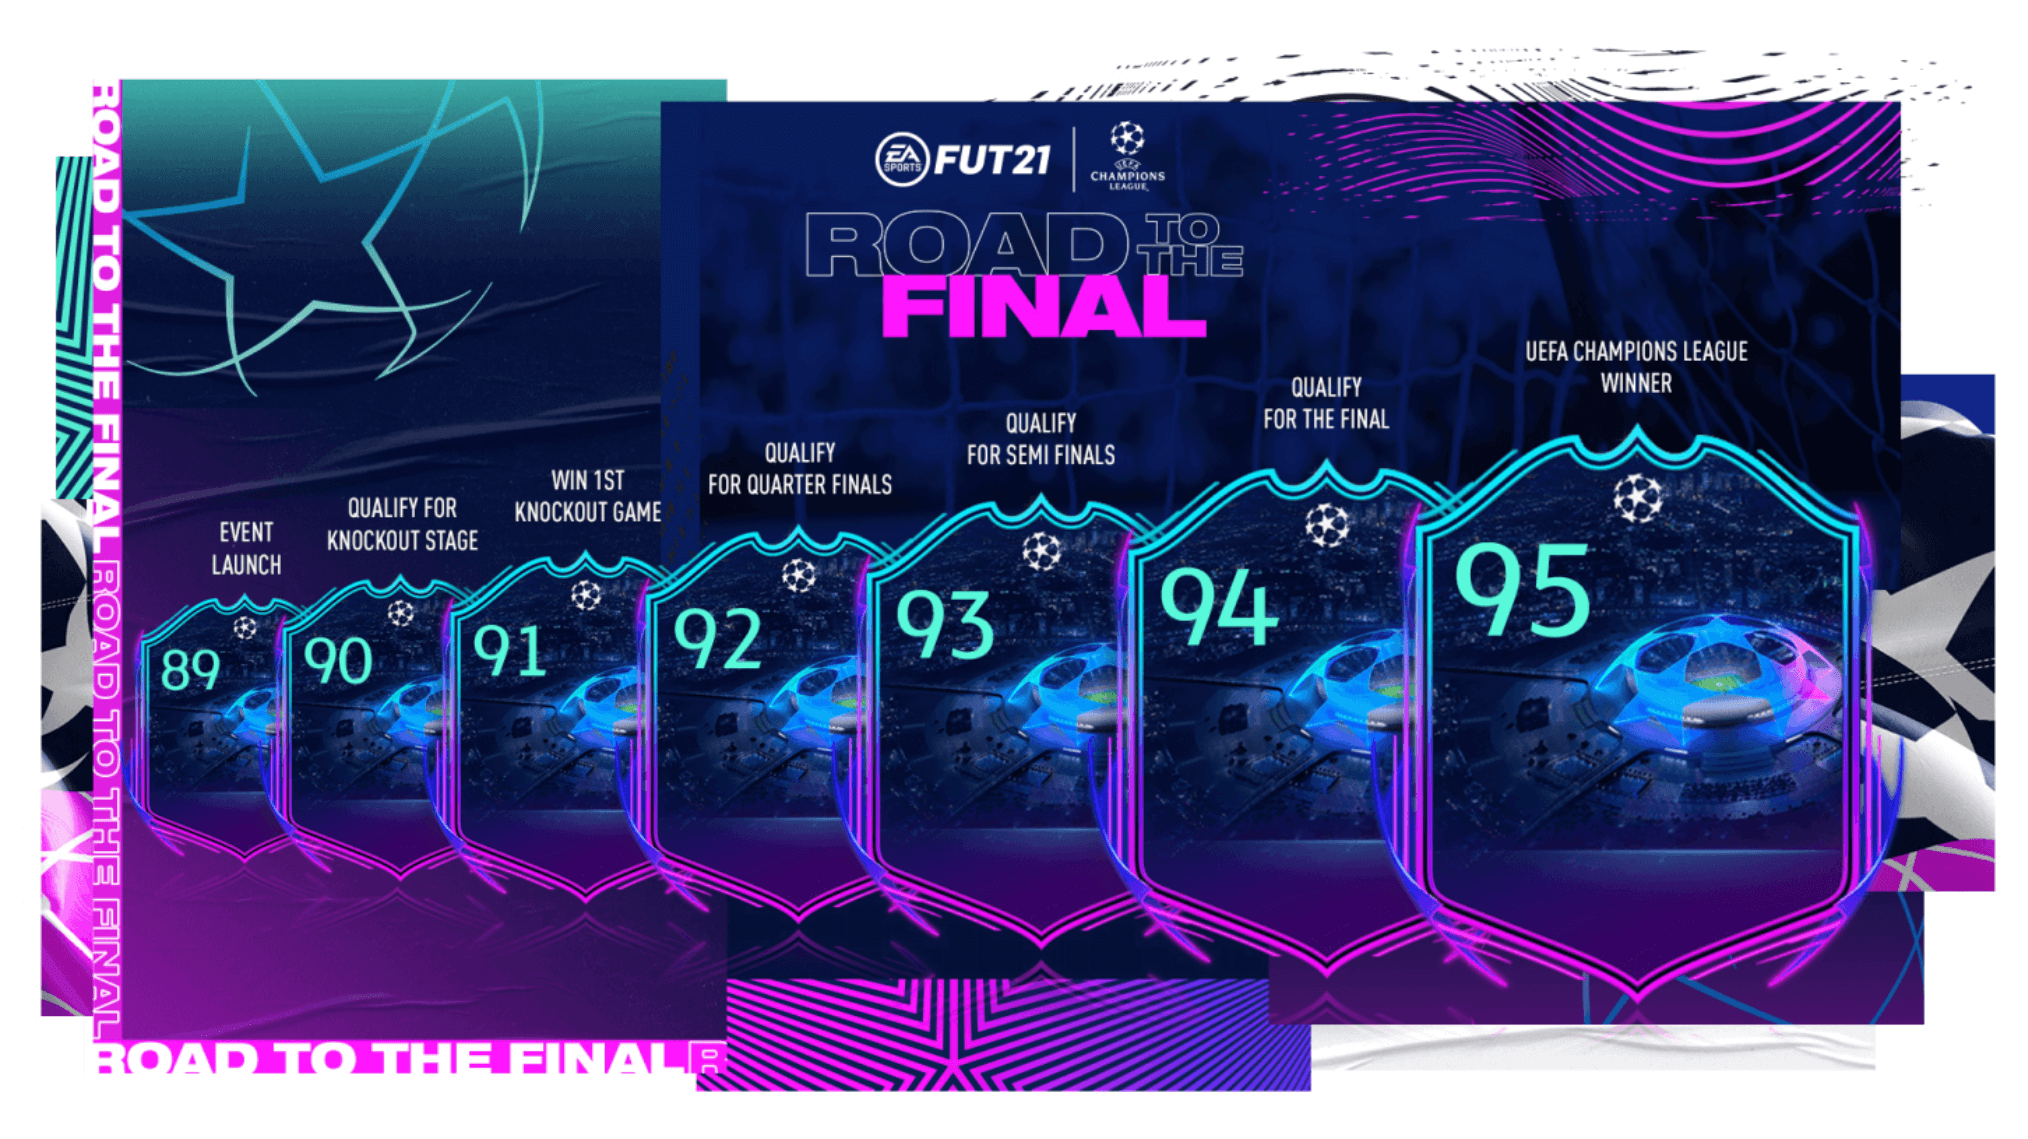 RTTF Card designs that were used in FIFA 21.